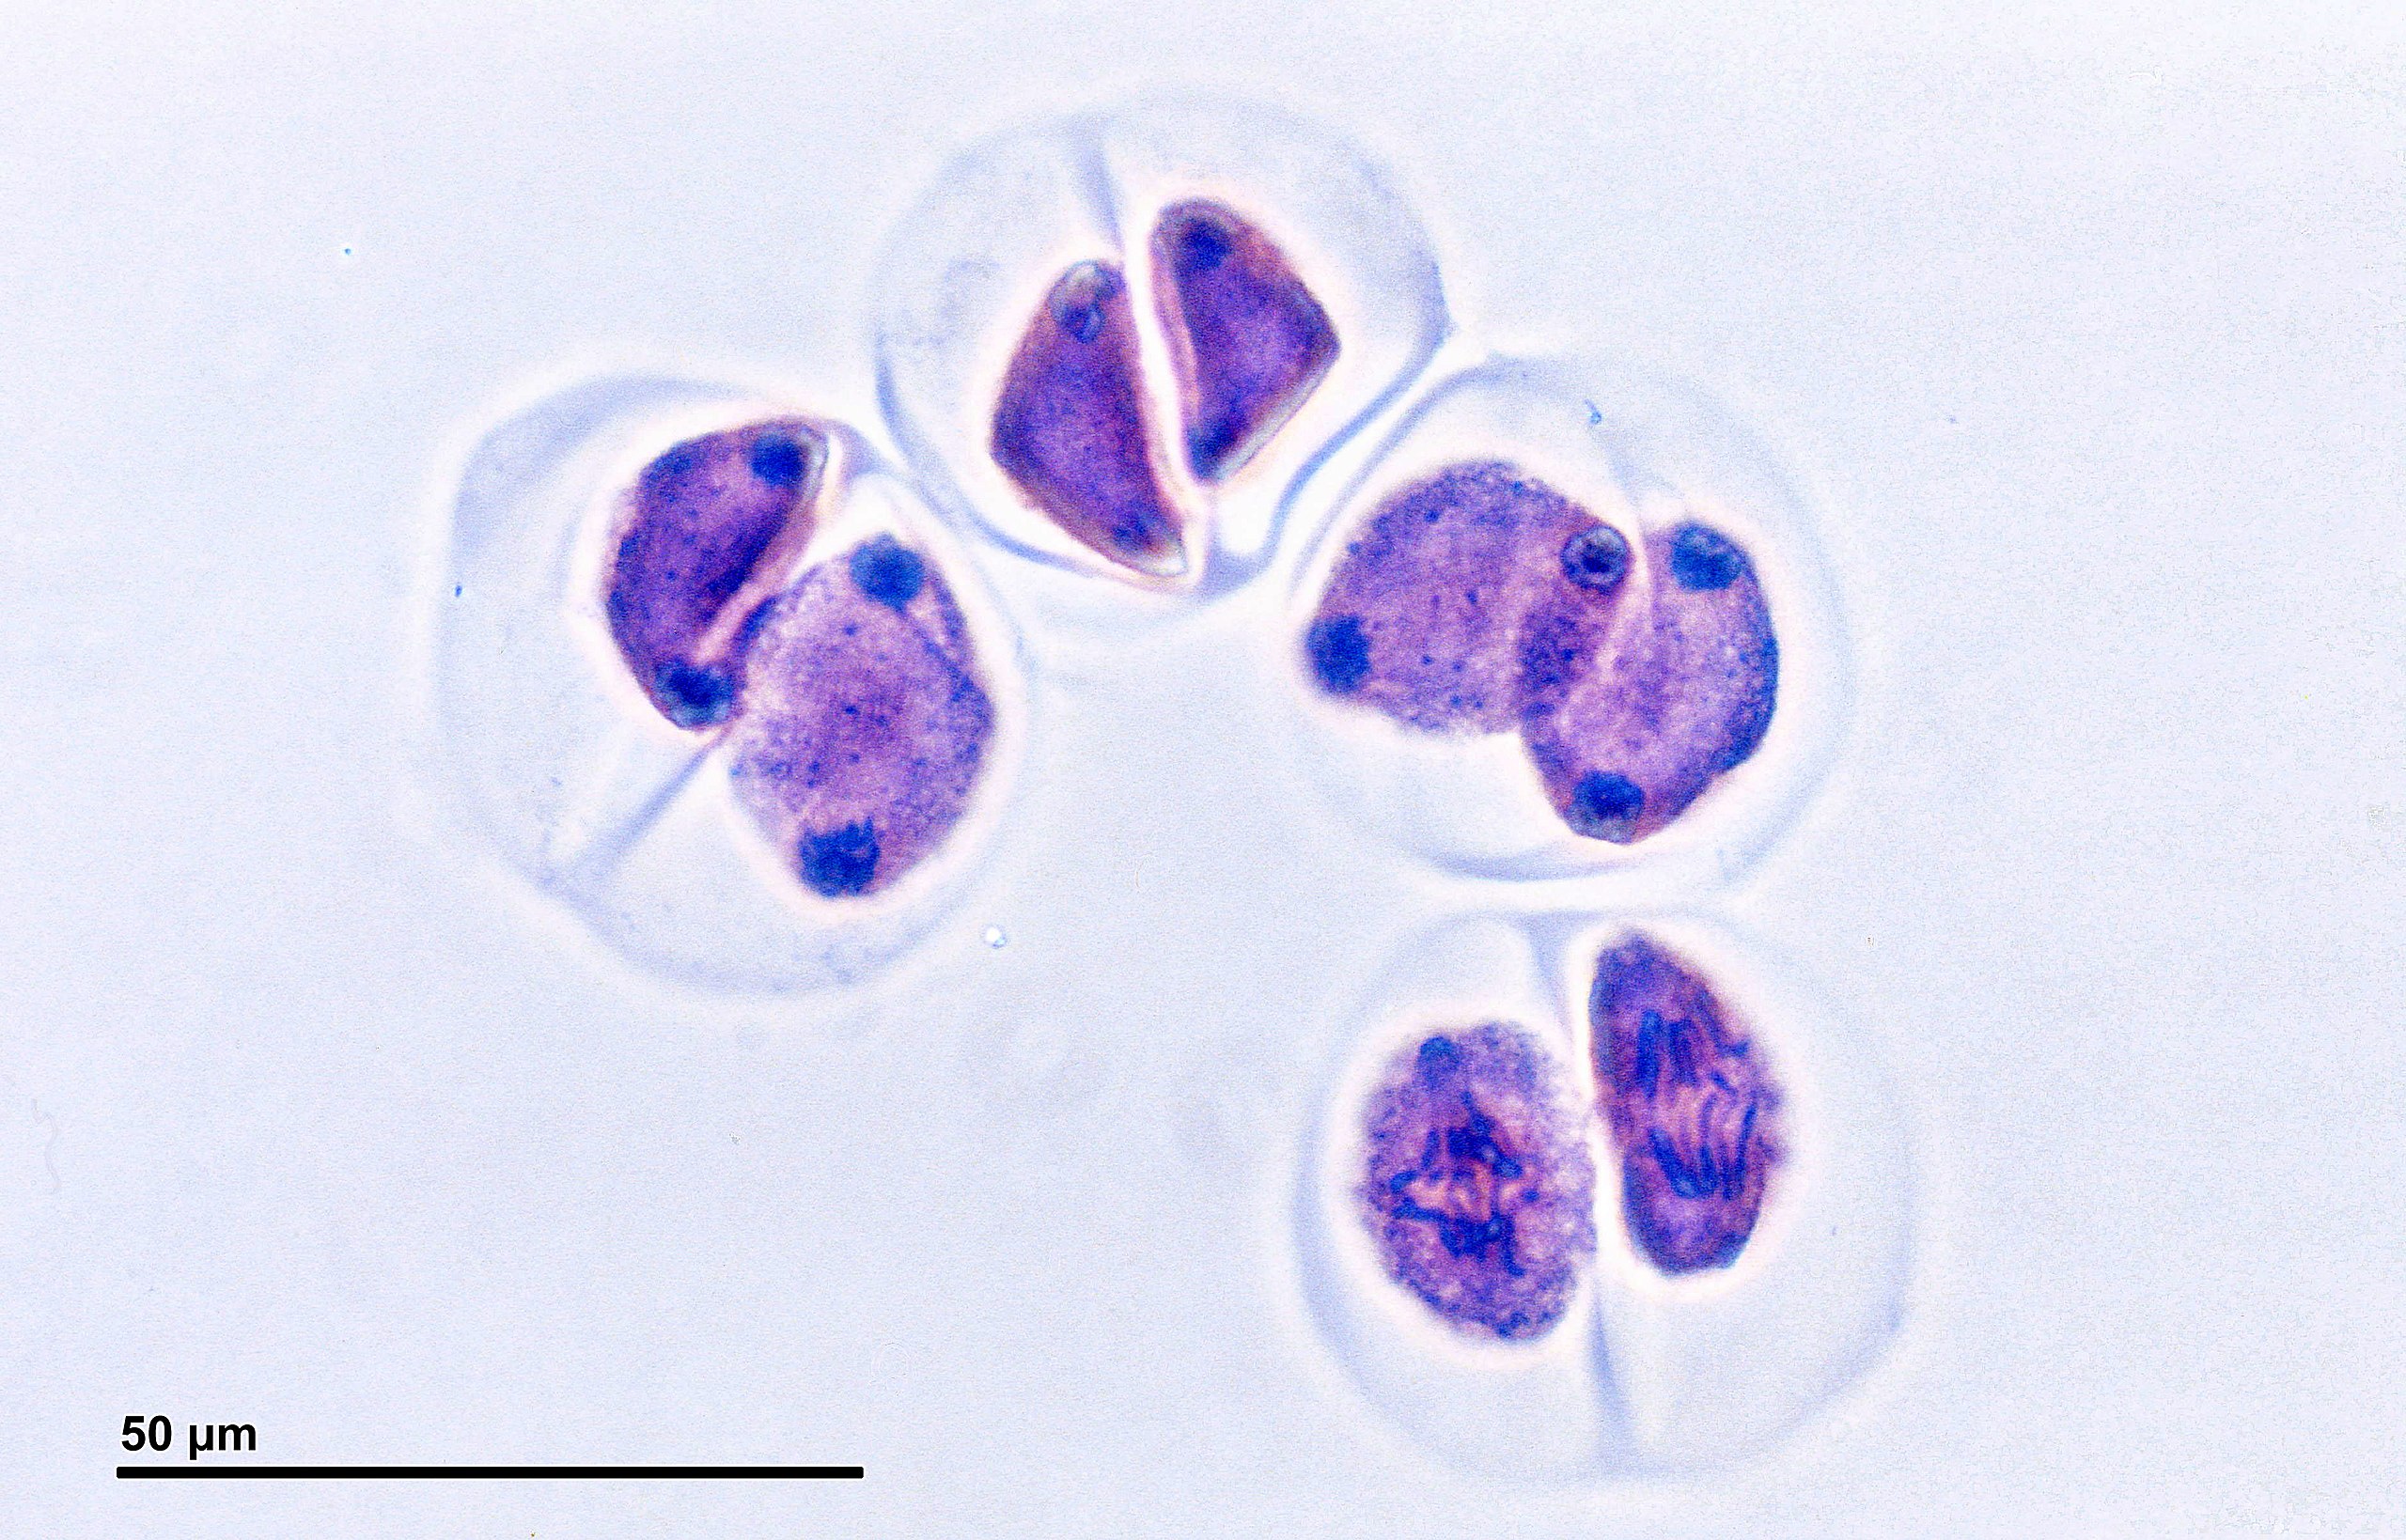 Four cells. The topmost three have four distinct regions where the chromosomes have clustered.